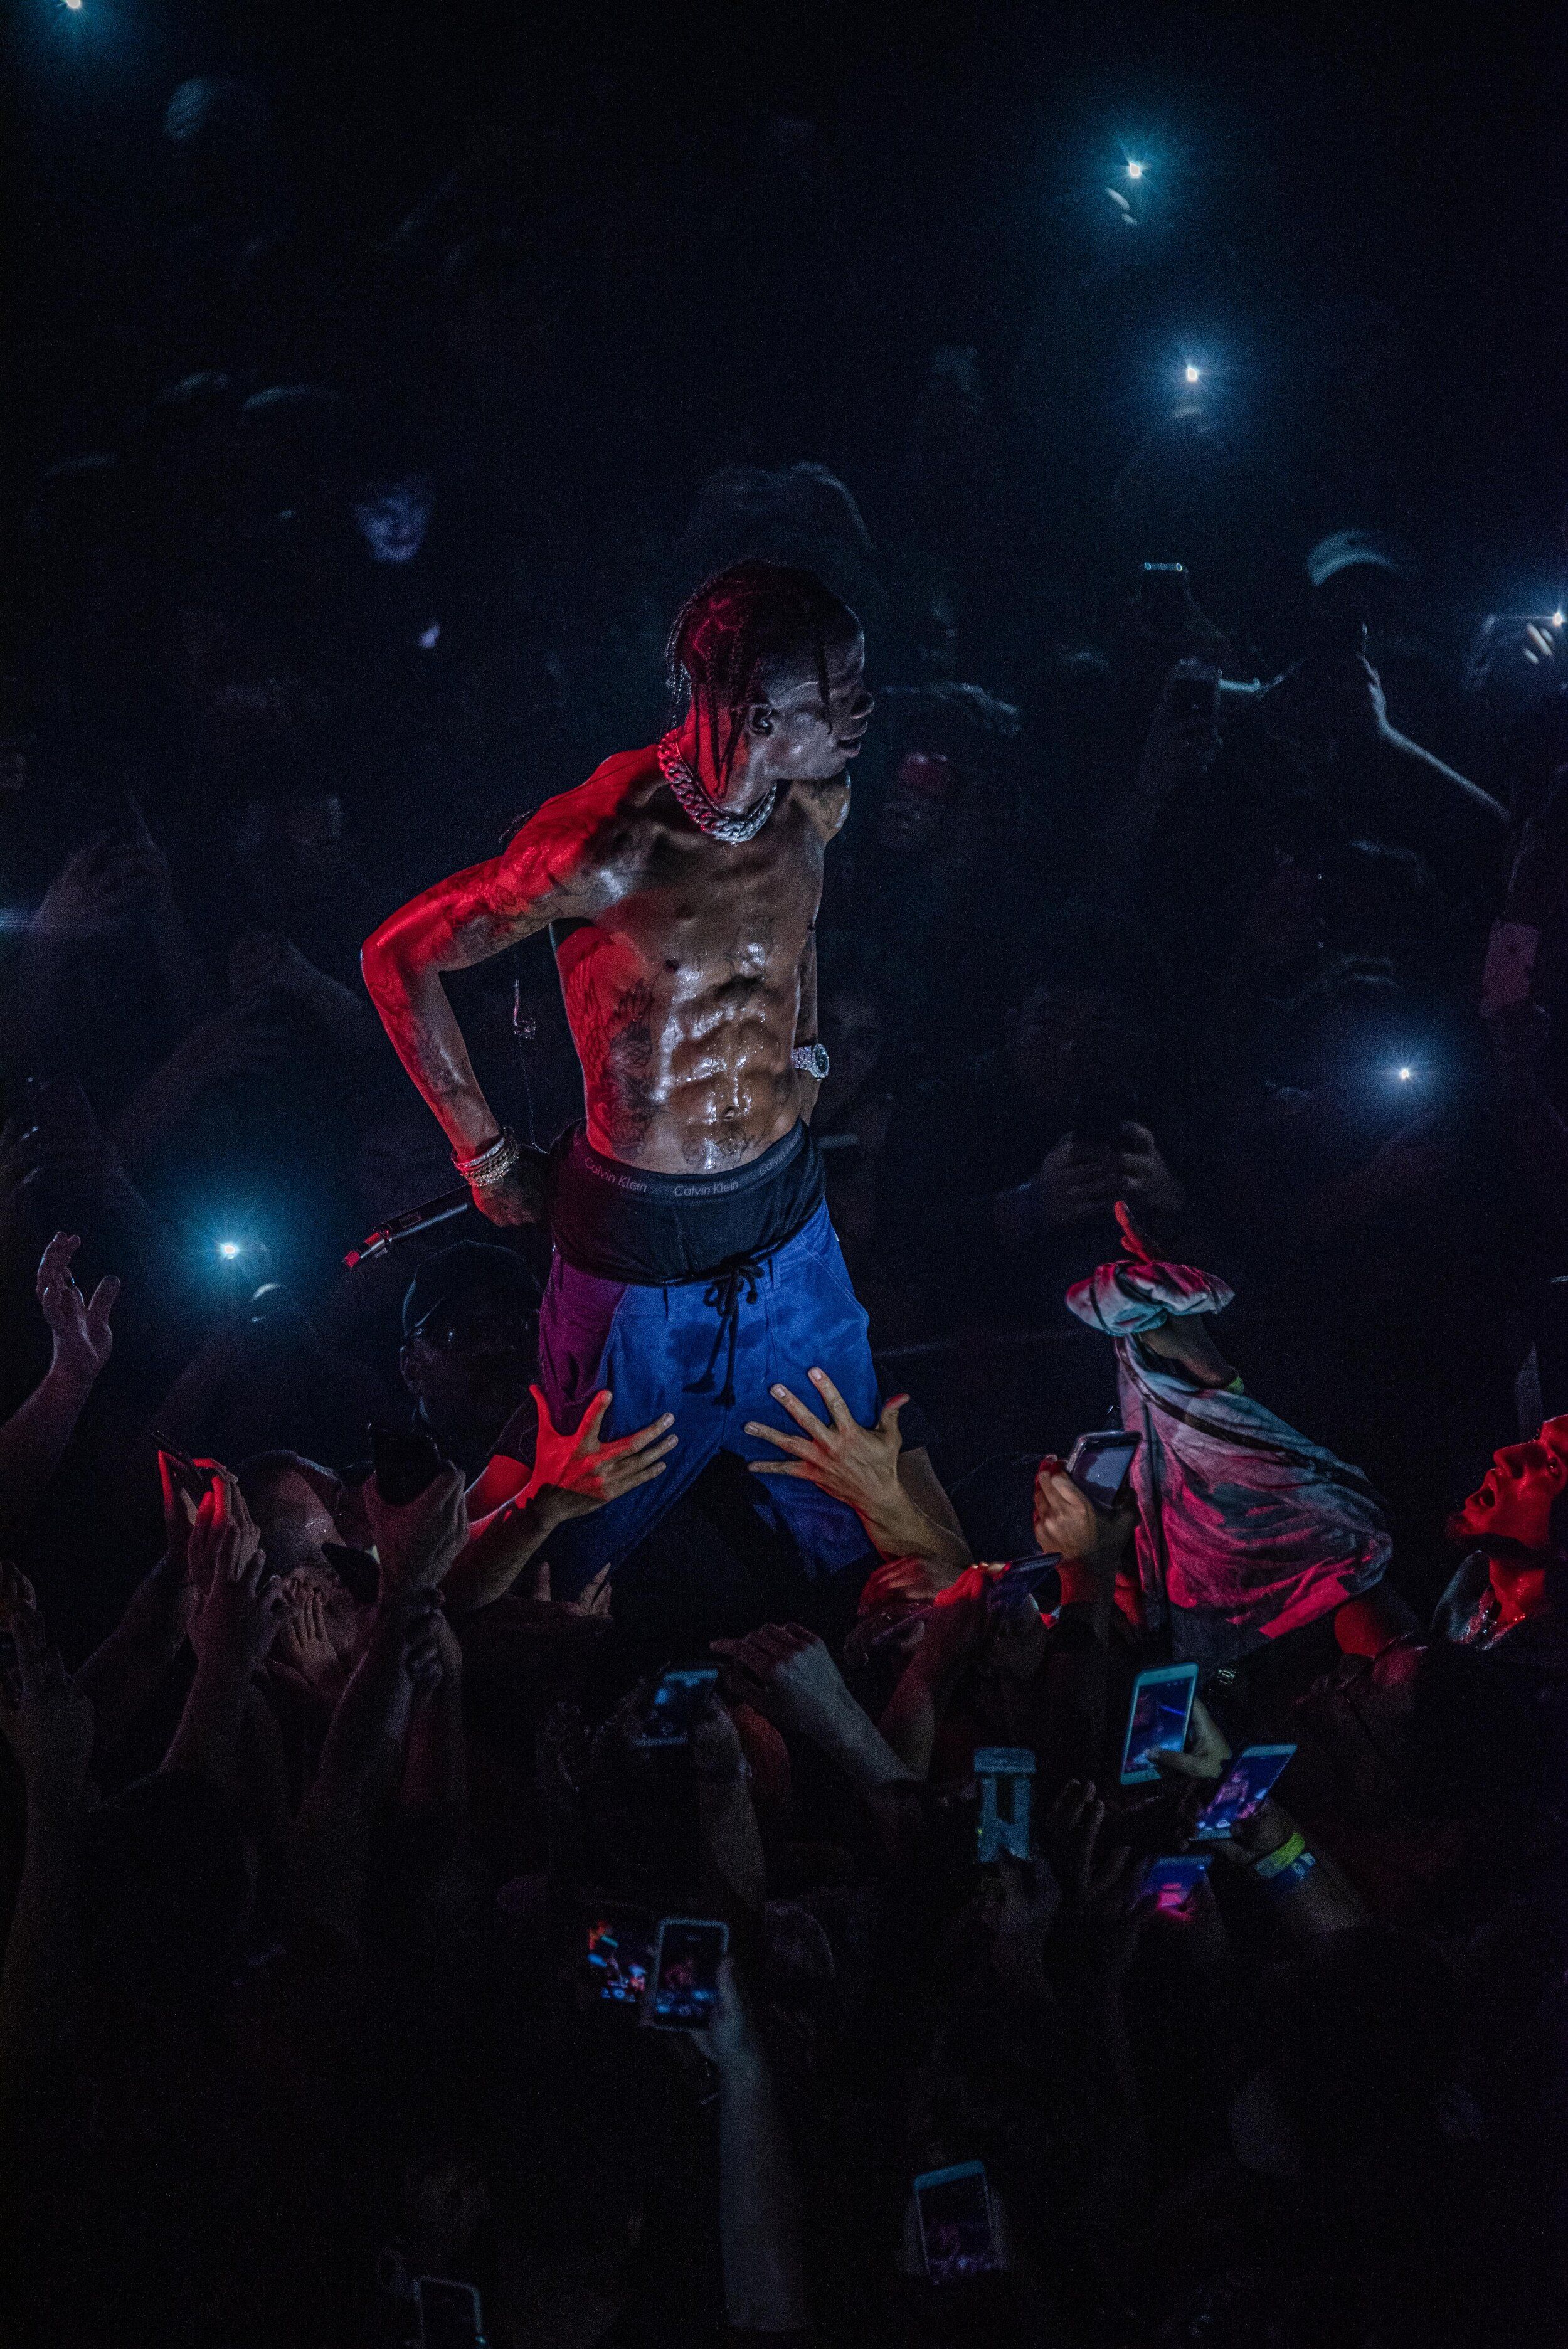 A shirtless man standing on top of a crowd of people in a dark room with his hands on his hips. - XXXTentacion